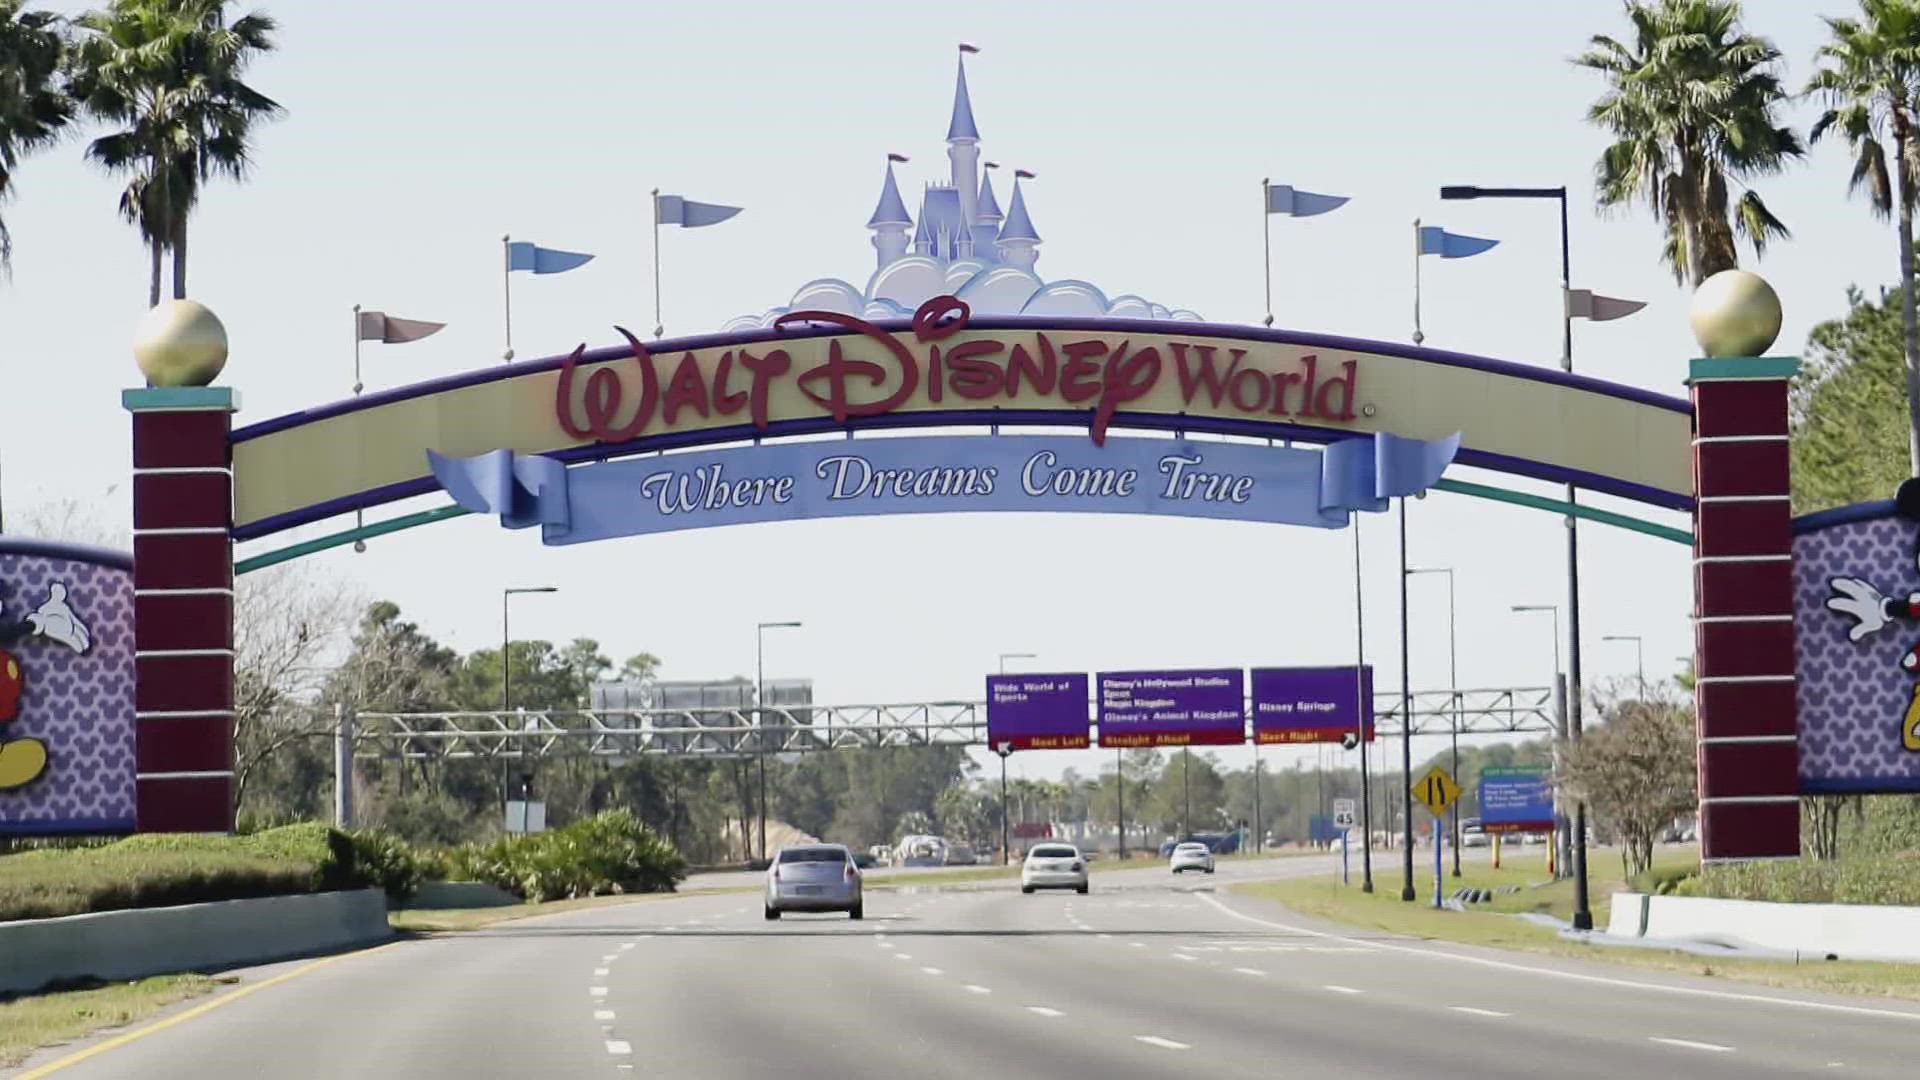 Starting December 8th, Disney will introduce park-specific pricing making Magic Kingdom the most expensive park on its busiest days.